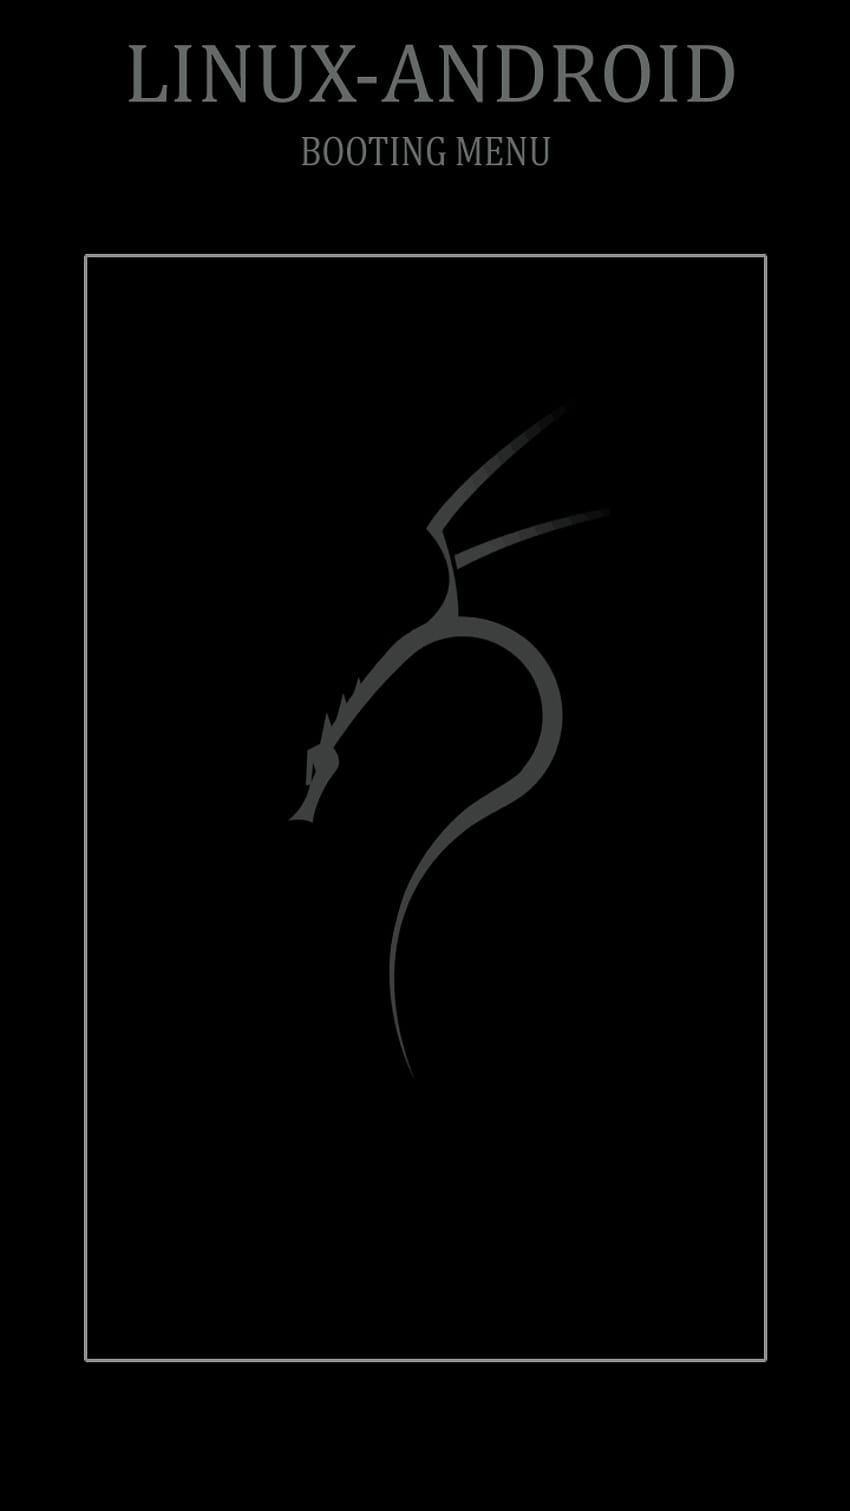 Kali Linux For Mobile posted by Ryan Sellers, amoled terminal linux HD phone wallpaper